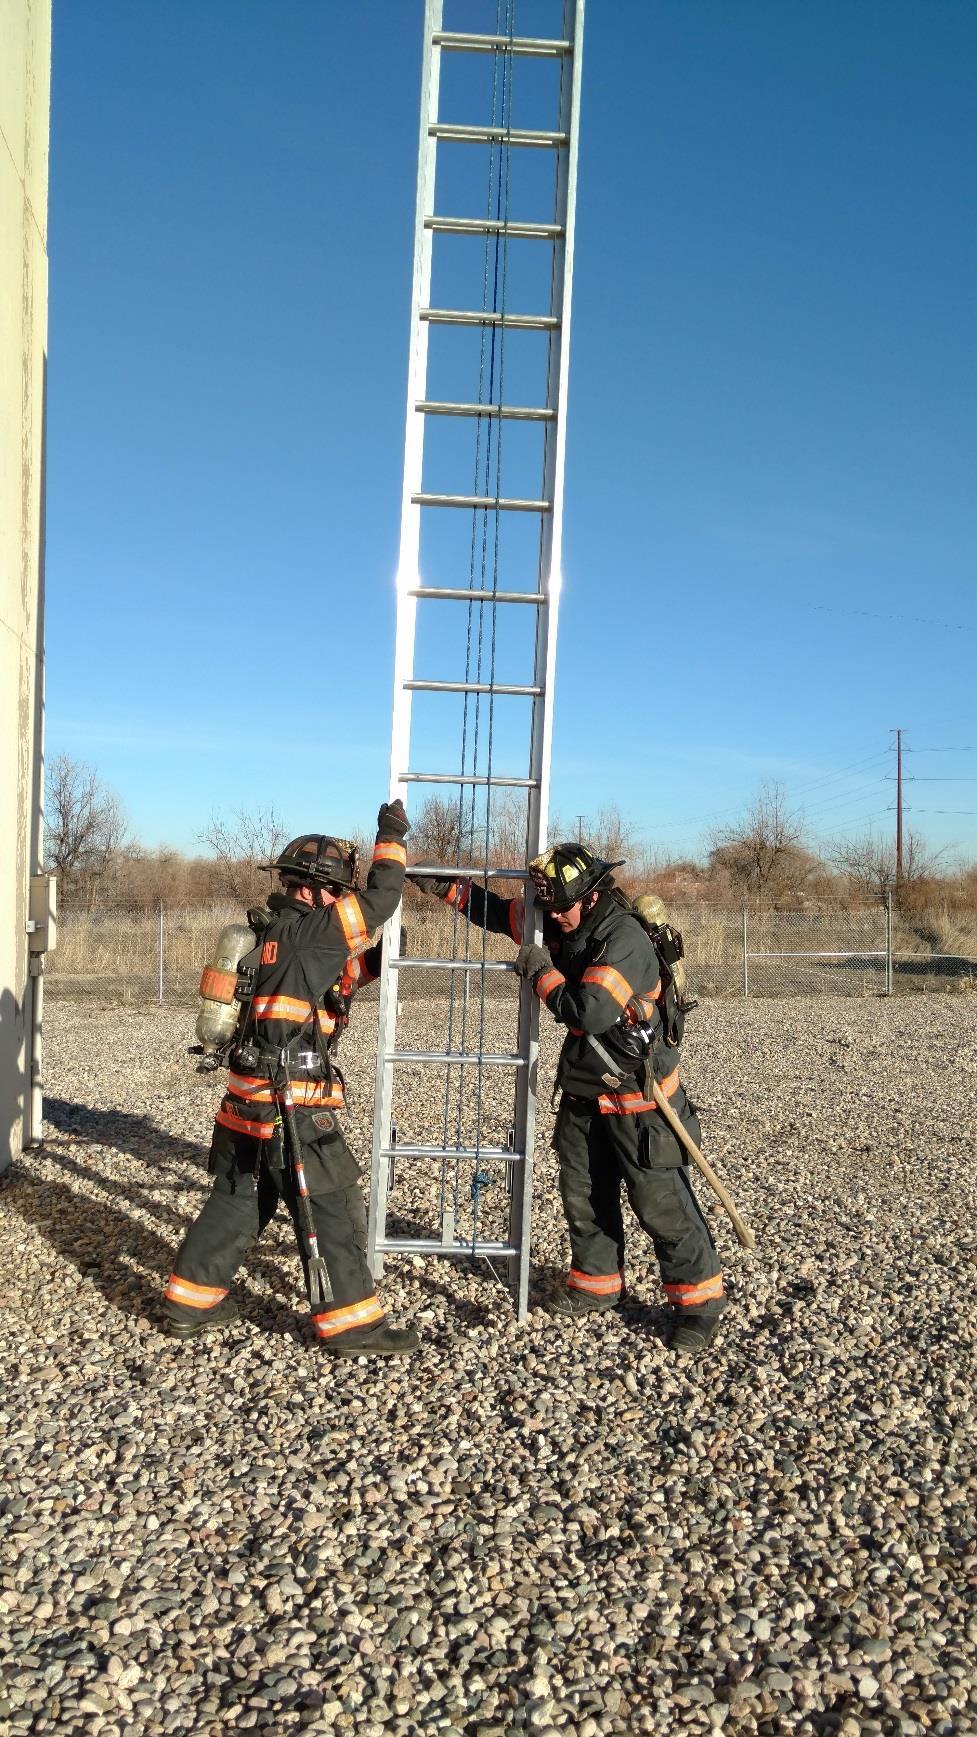 #4 The firefighters pivot the ladder into a position with the fly section facing away from the building.